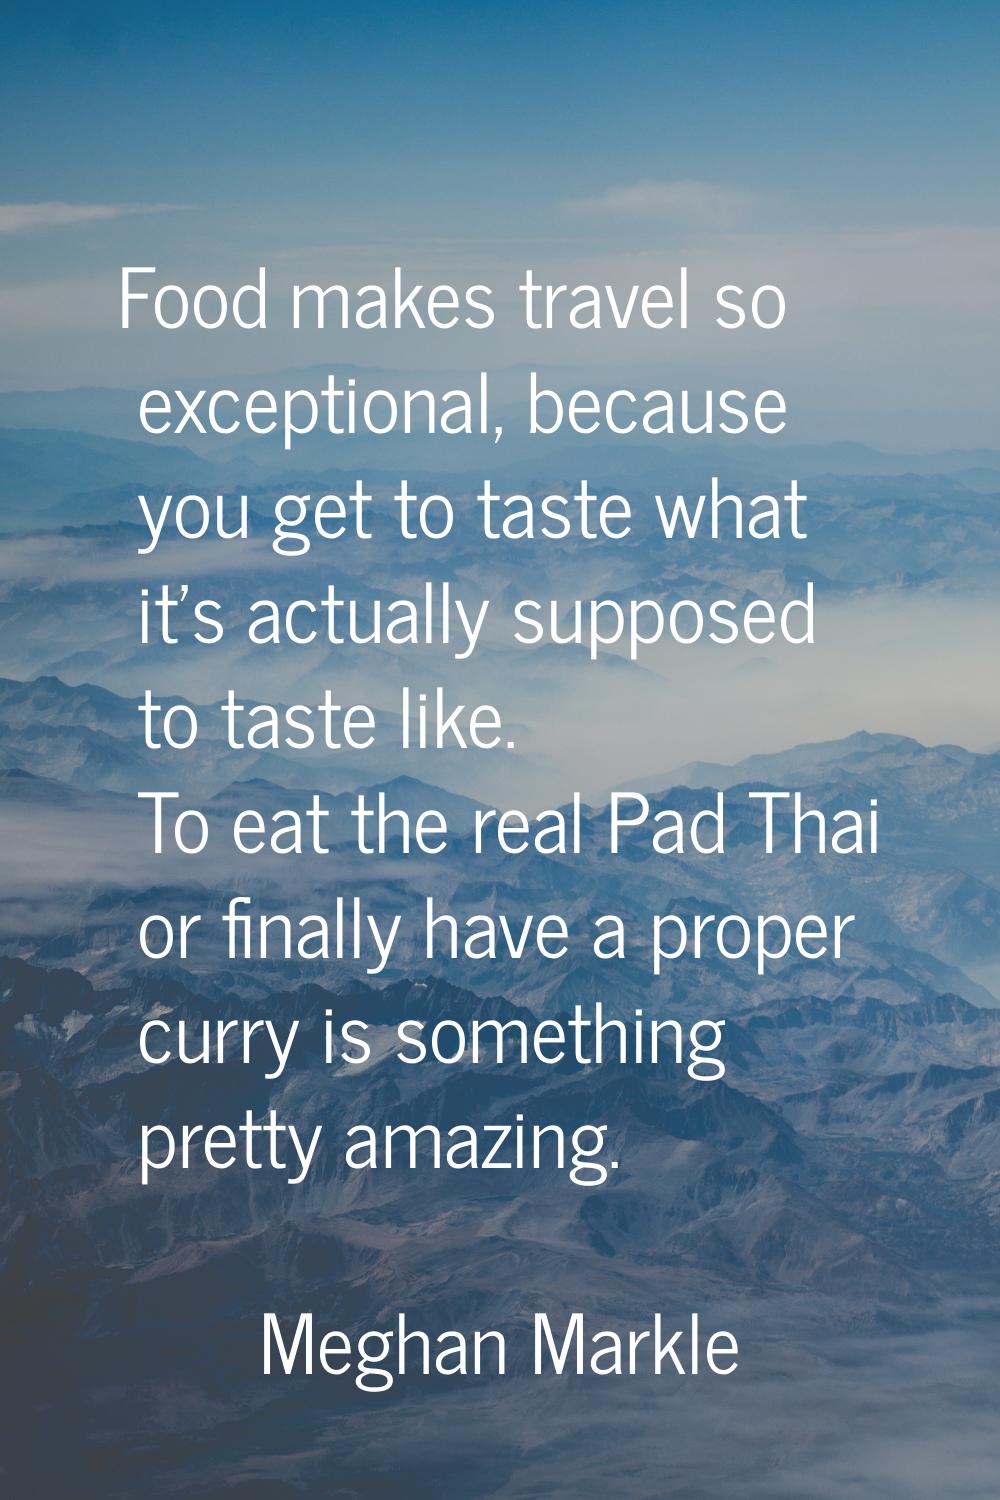 Food makes travel so exceptional, because you get to taste what it's actually supposed to taste lik